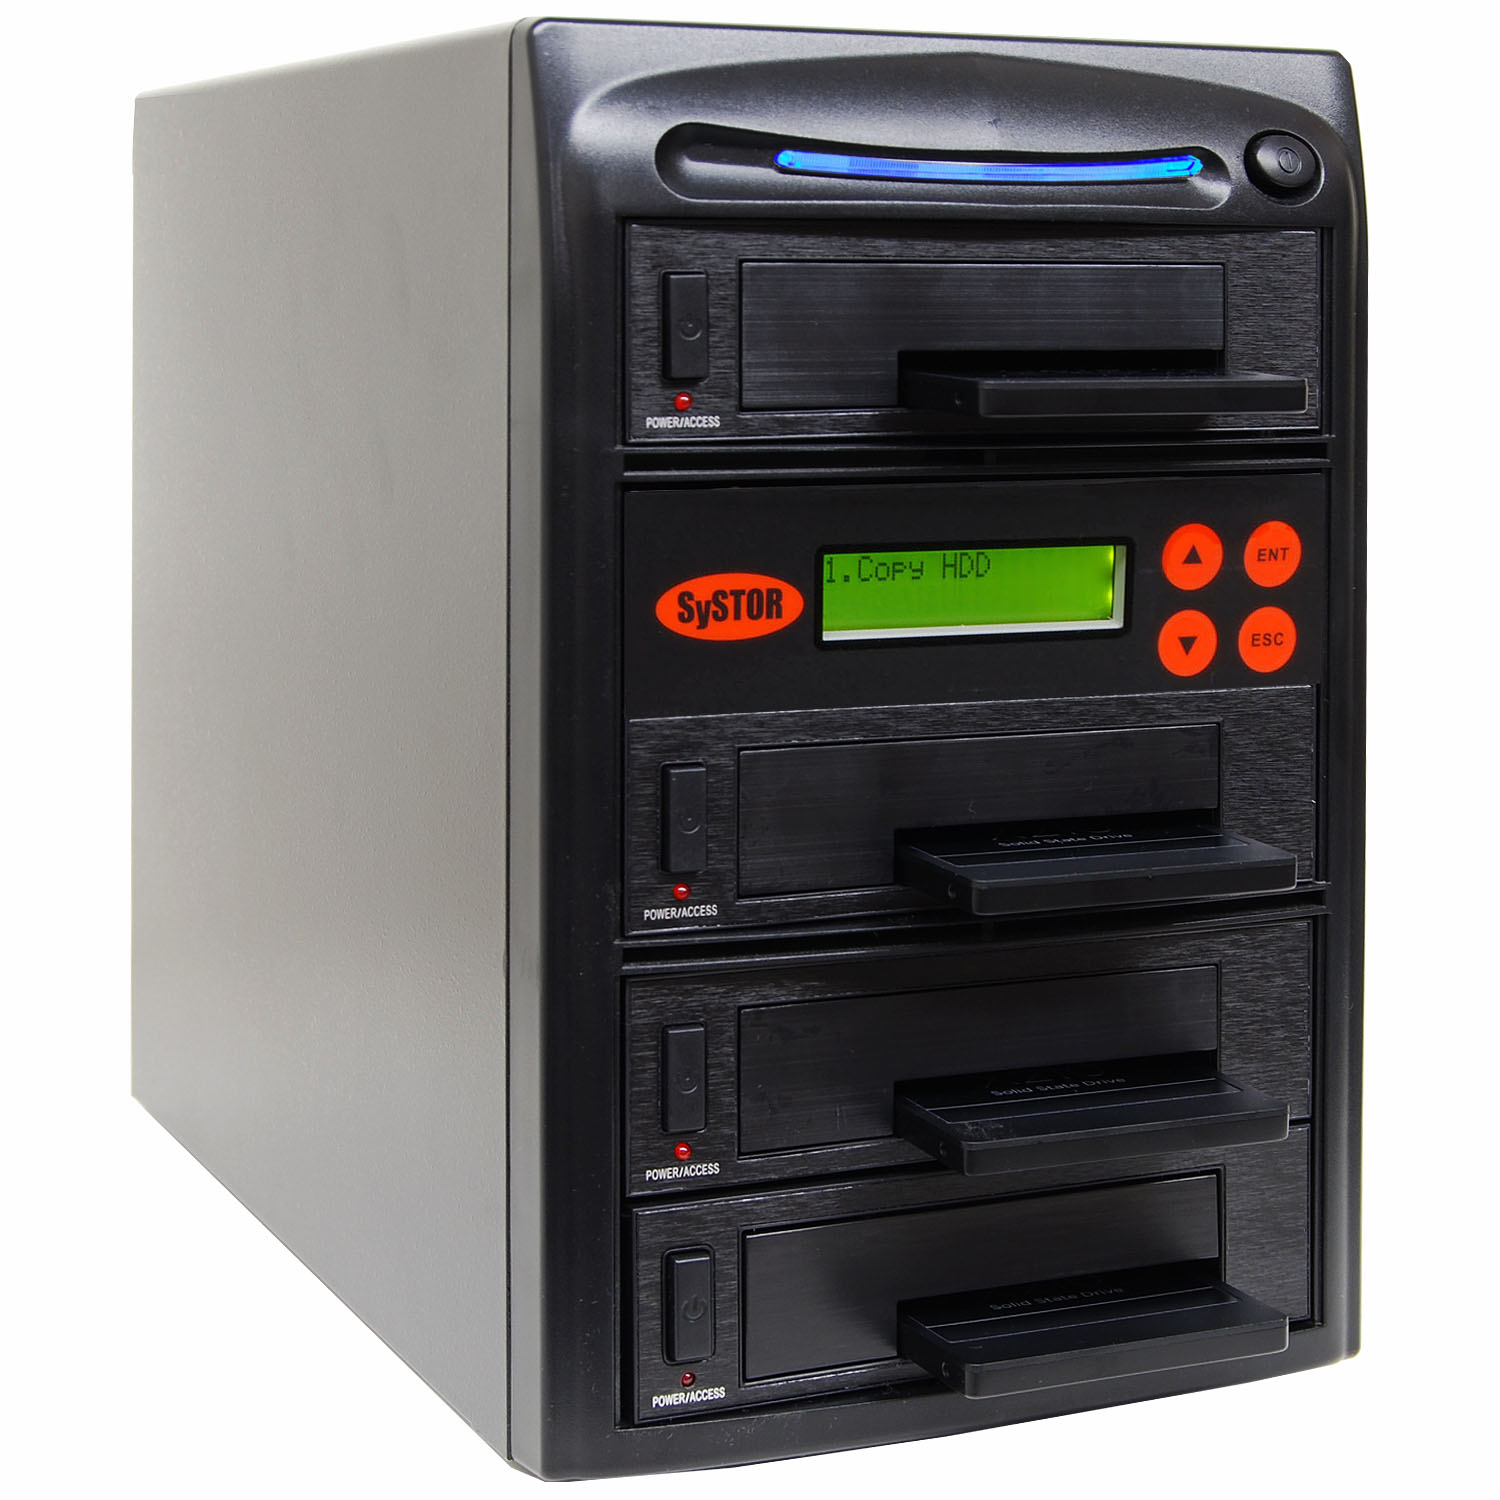 3 Hard Drive/Solid State Drive (HDD/SSD) Duplicator